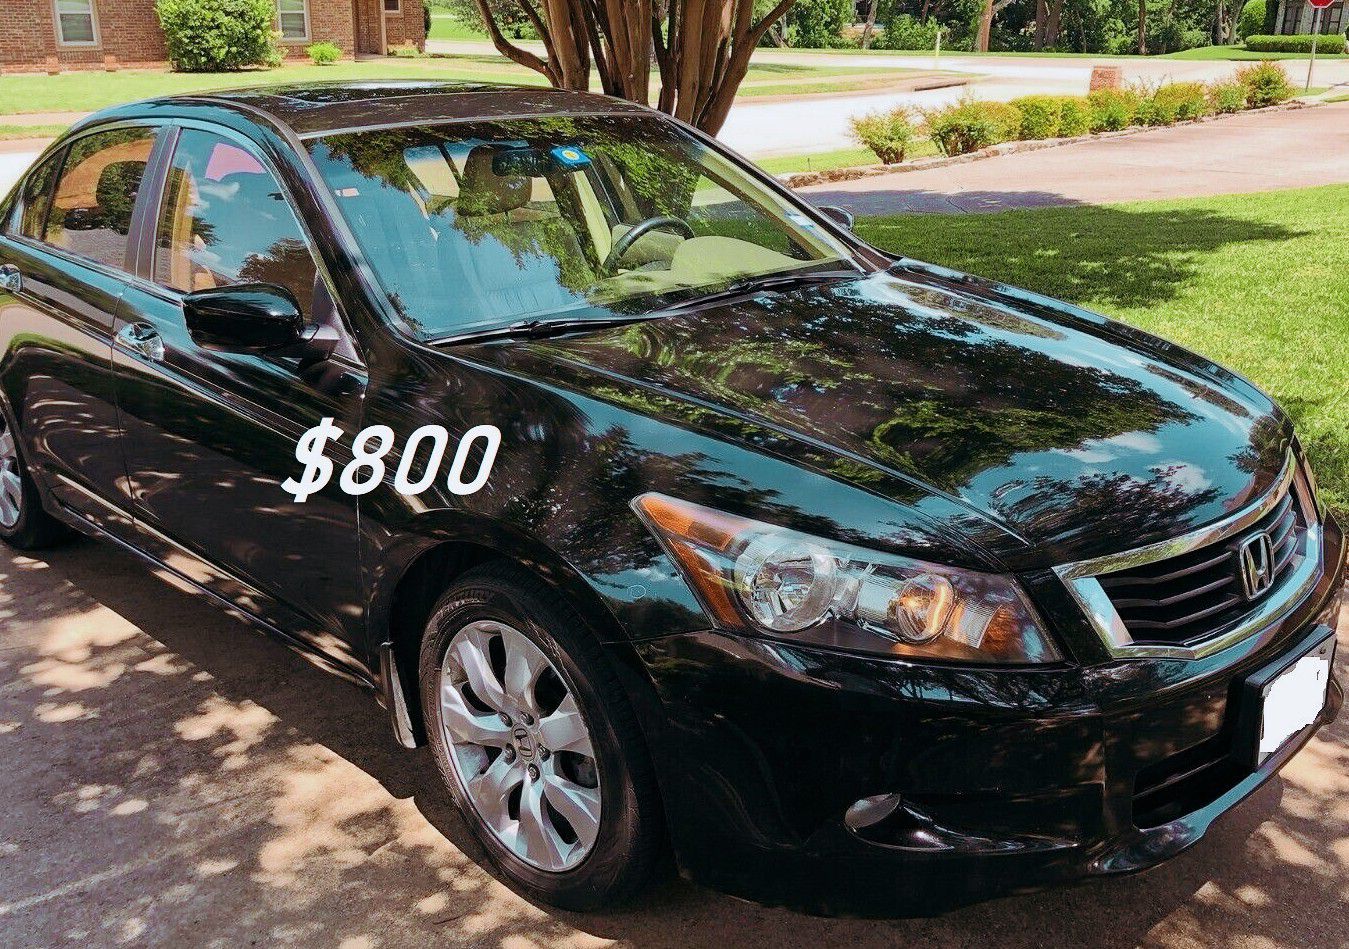 ✅✅💝💲8️OO URGENTLY I'm seling my family car 2OO9 Honda Accord Sedan Super cute and clean in and out.✅✅💕